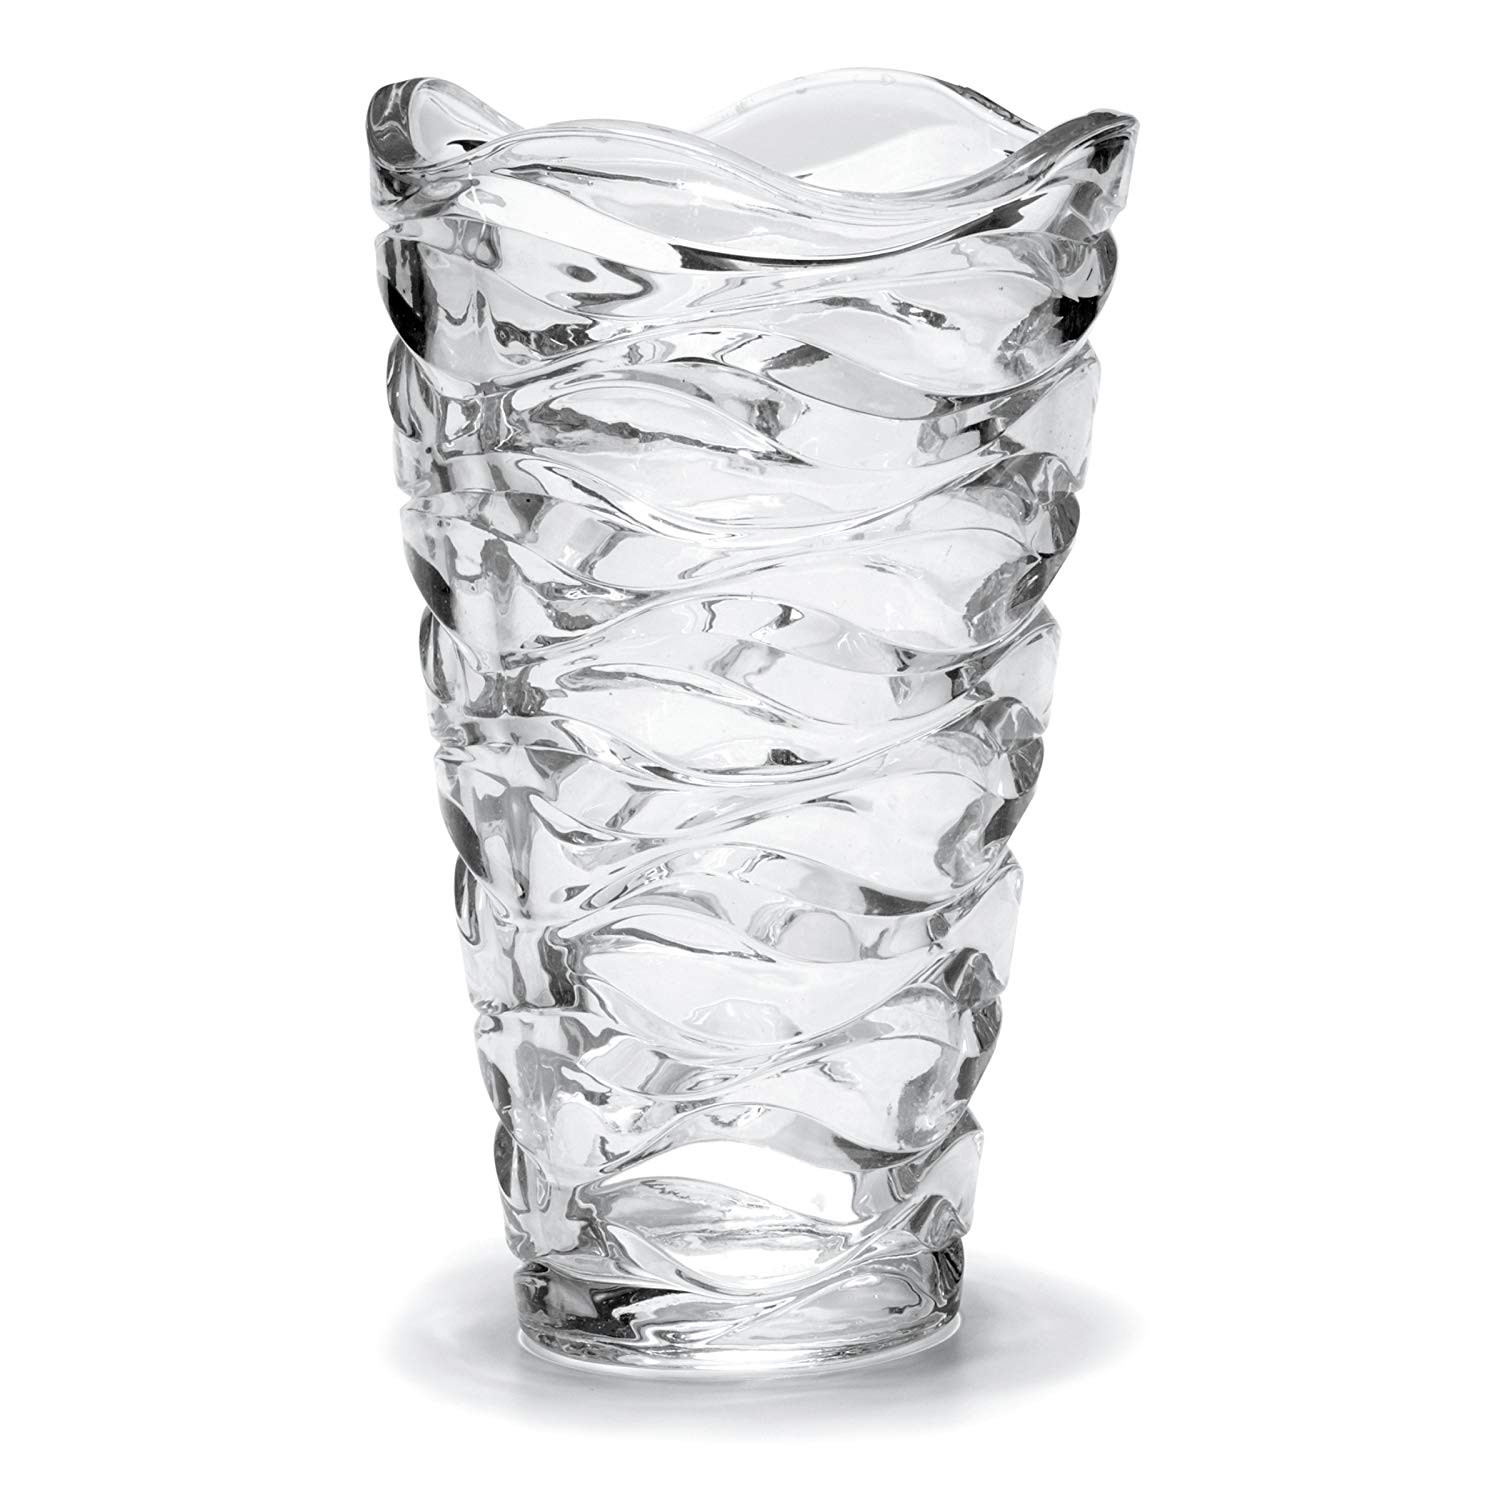 22 Lovable Marquis by Waterford Markham Vase 9 2024 free download marquis by waterford markham vase 9 of amazon com mikasa atlantic crystal vase 11 inch home kitchen intended for 81npldxgwnl sl1500